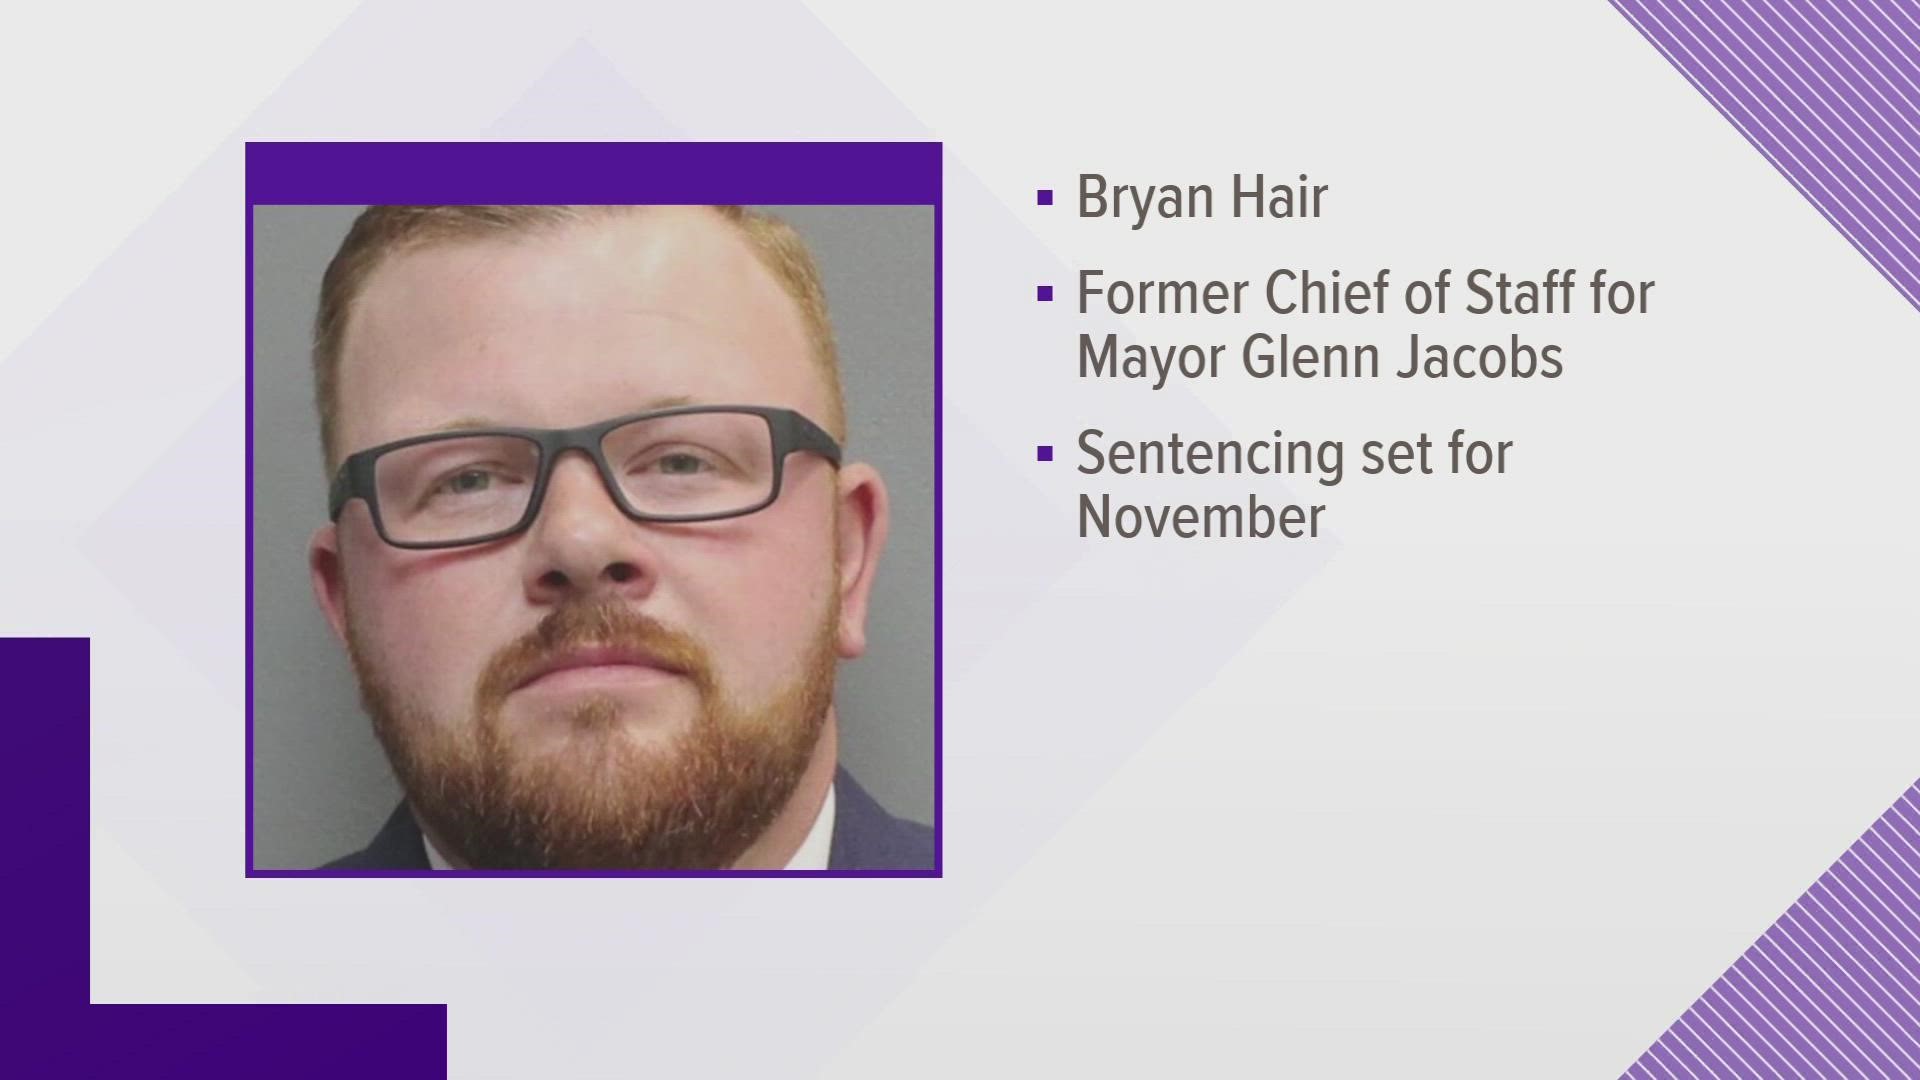 Bryan Hair kept the county-owned cart at home for several months in 2020. Employees are prohibited from personal use of public property.